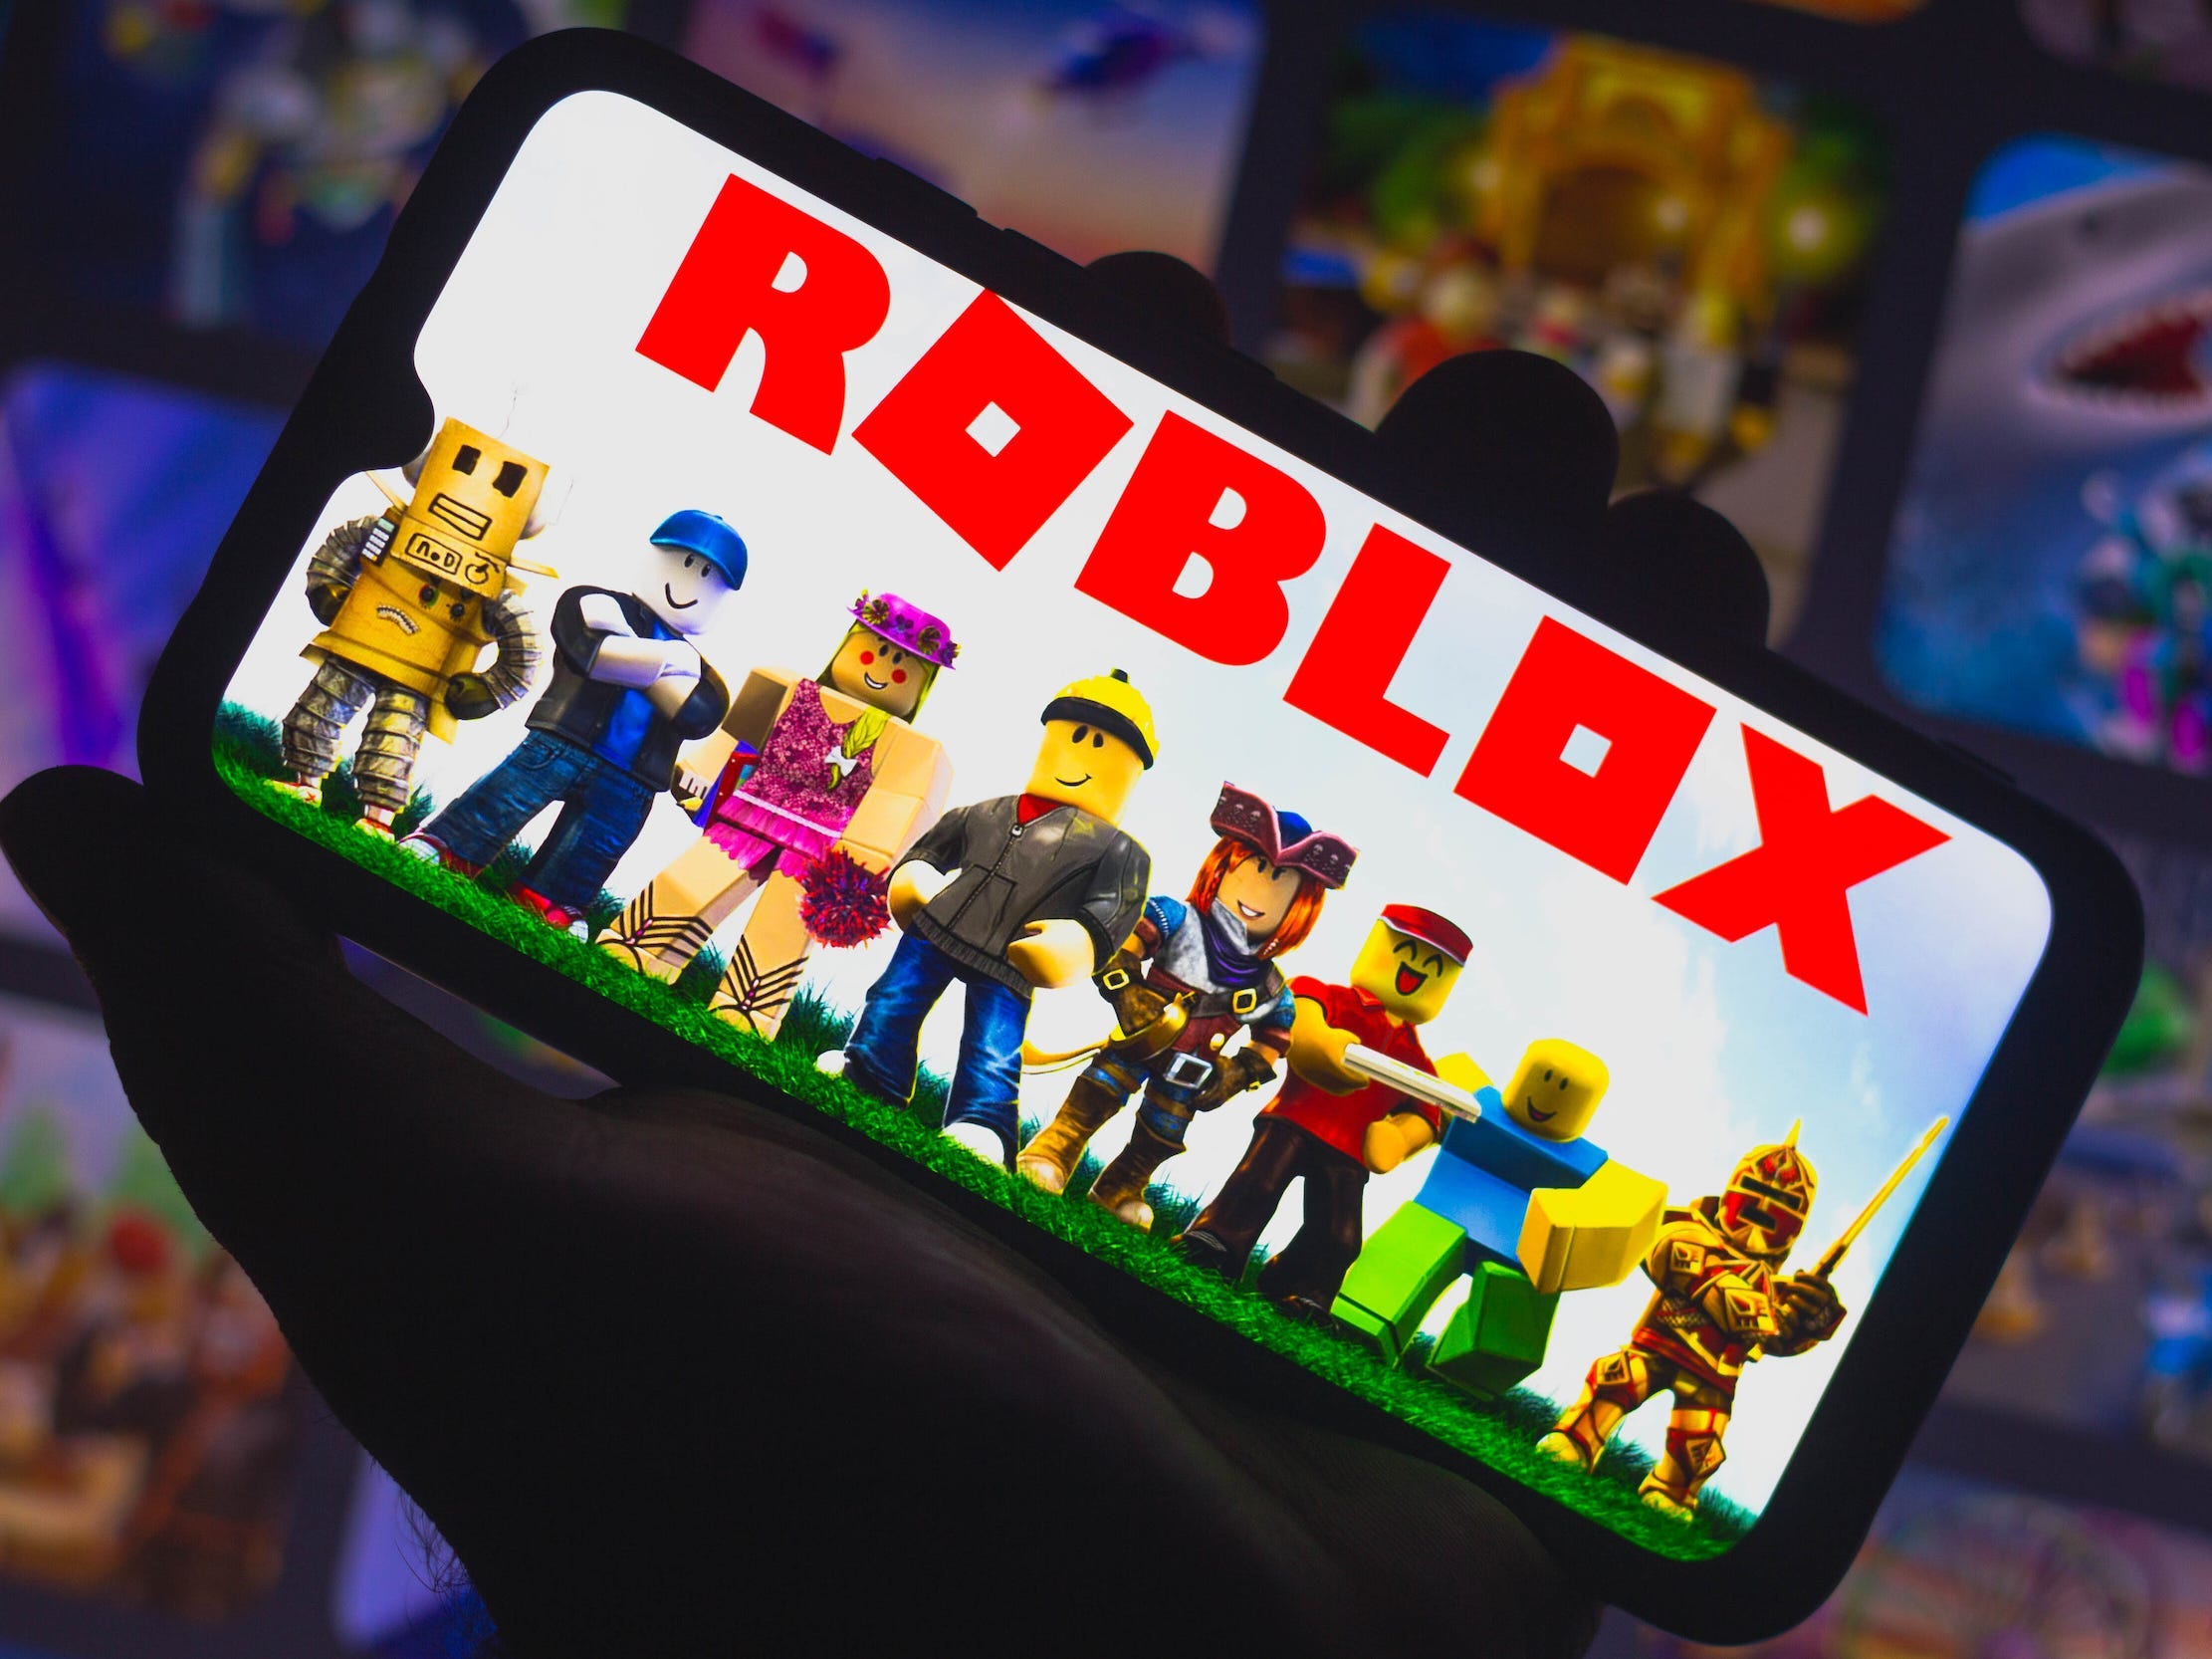 Roblox involved in class action lawsuit over gambling sites using its  in-game currency